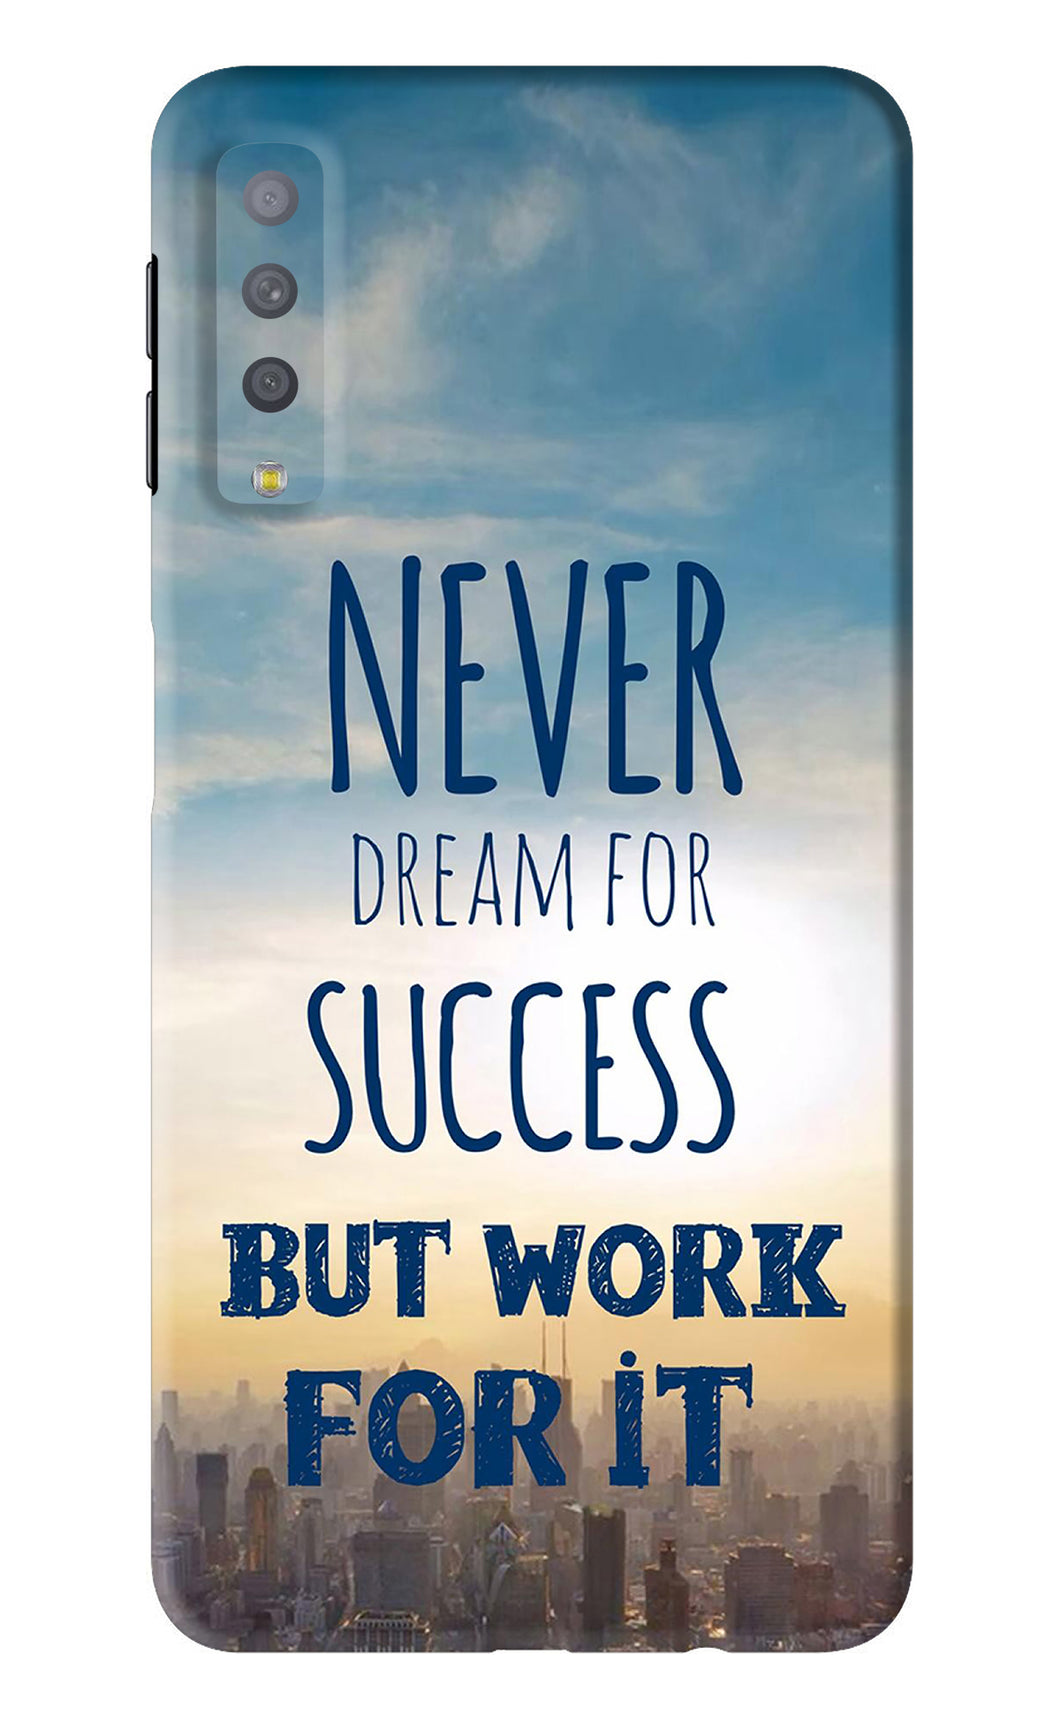 Never Dream For Success But Work For It Samsung Galaxy A7 2018 Back Skin Wrap